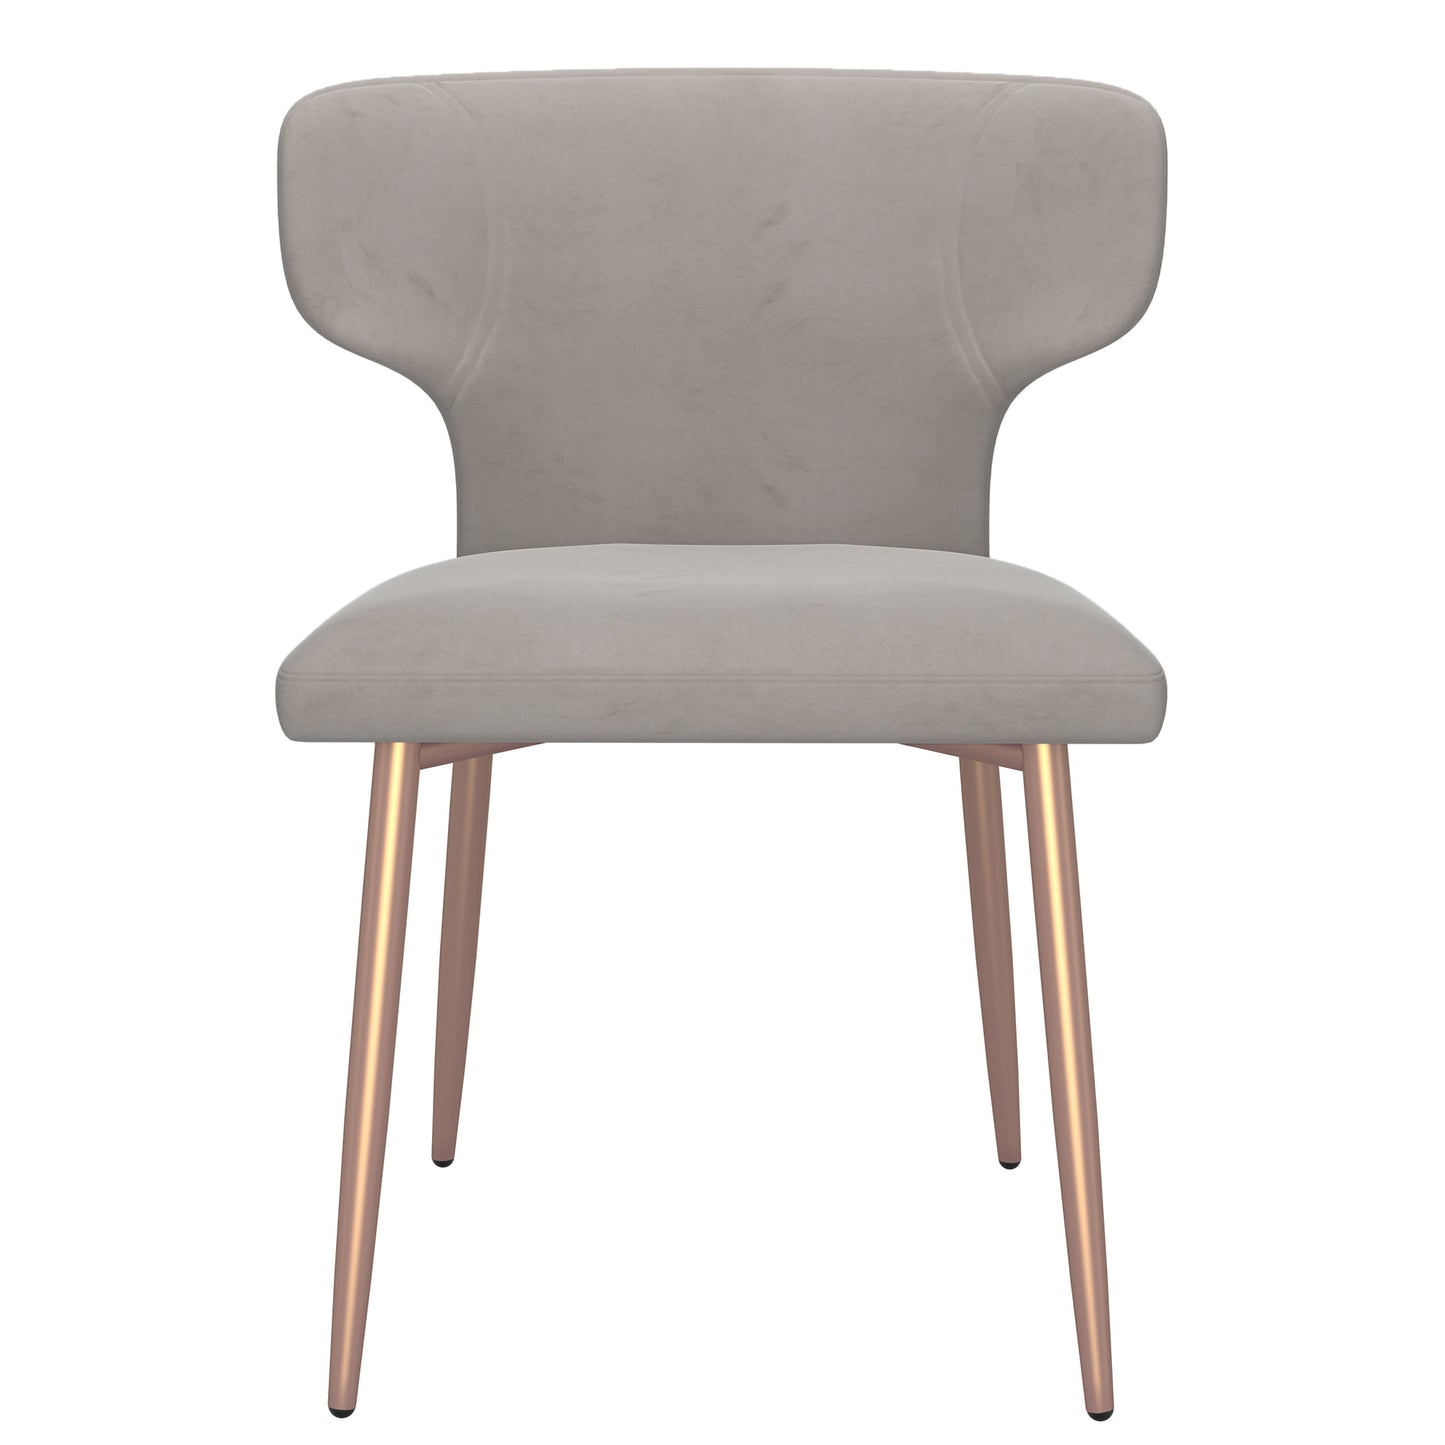 Akira Side Chair, Set of 2 in Grey and Aged Gold